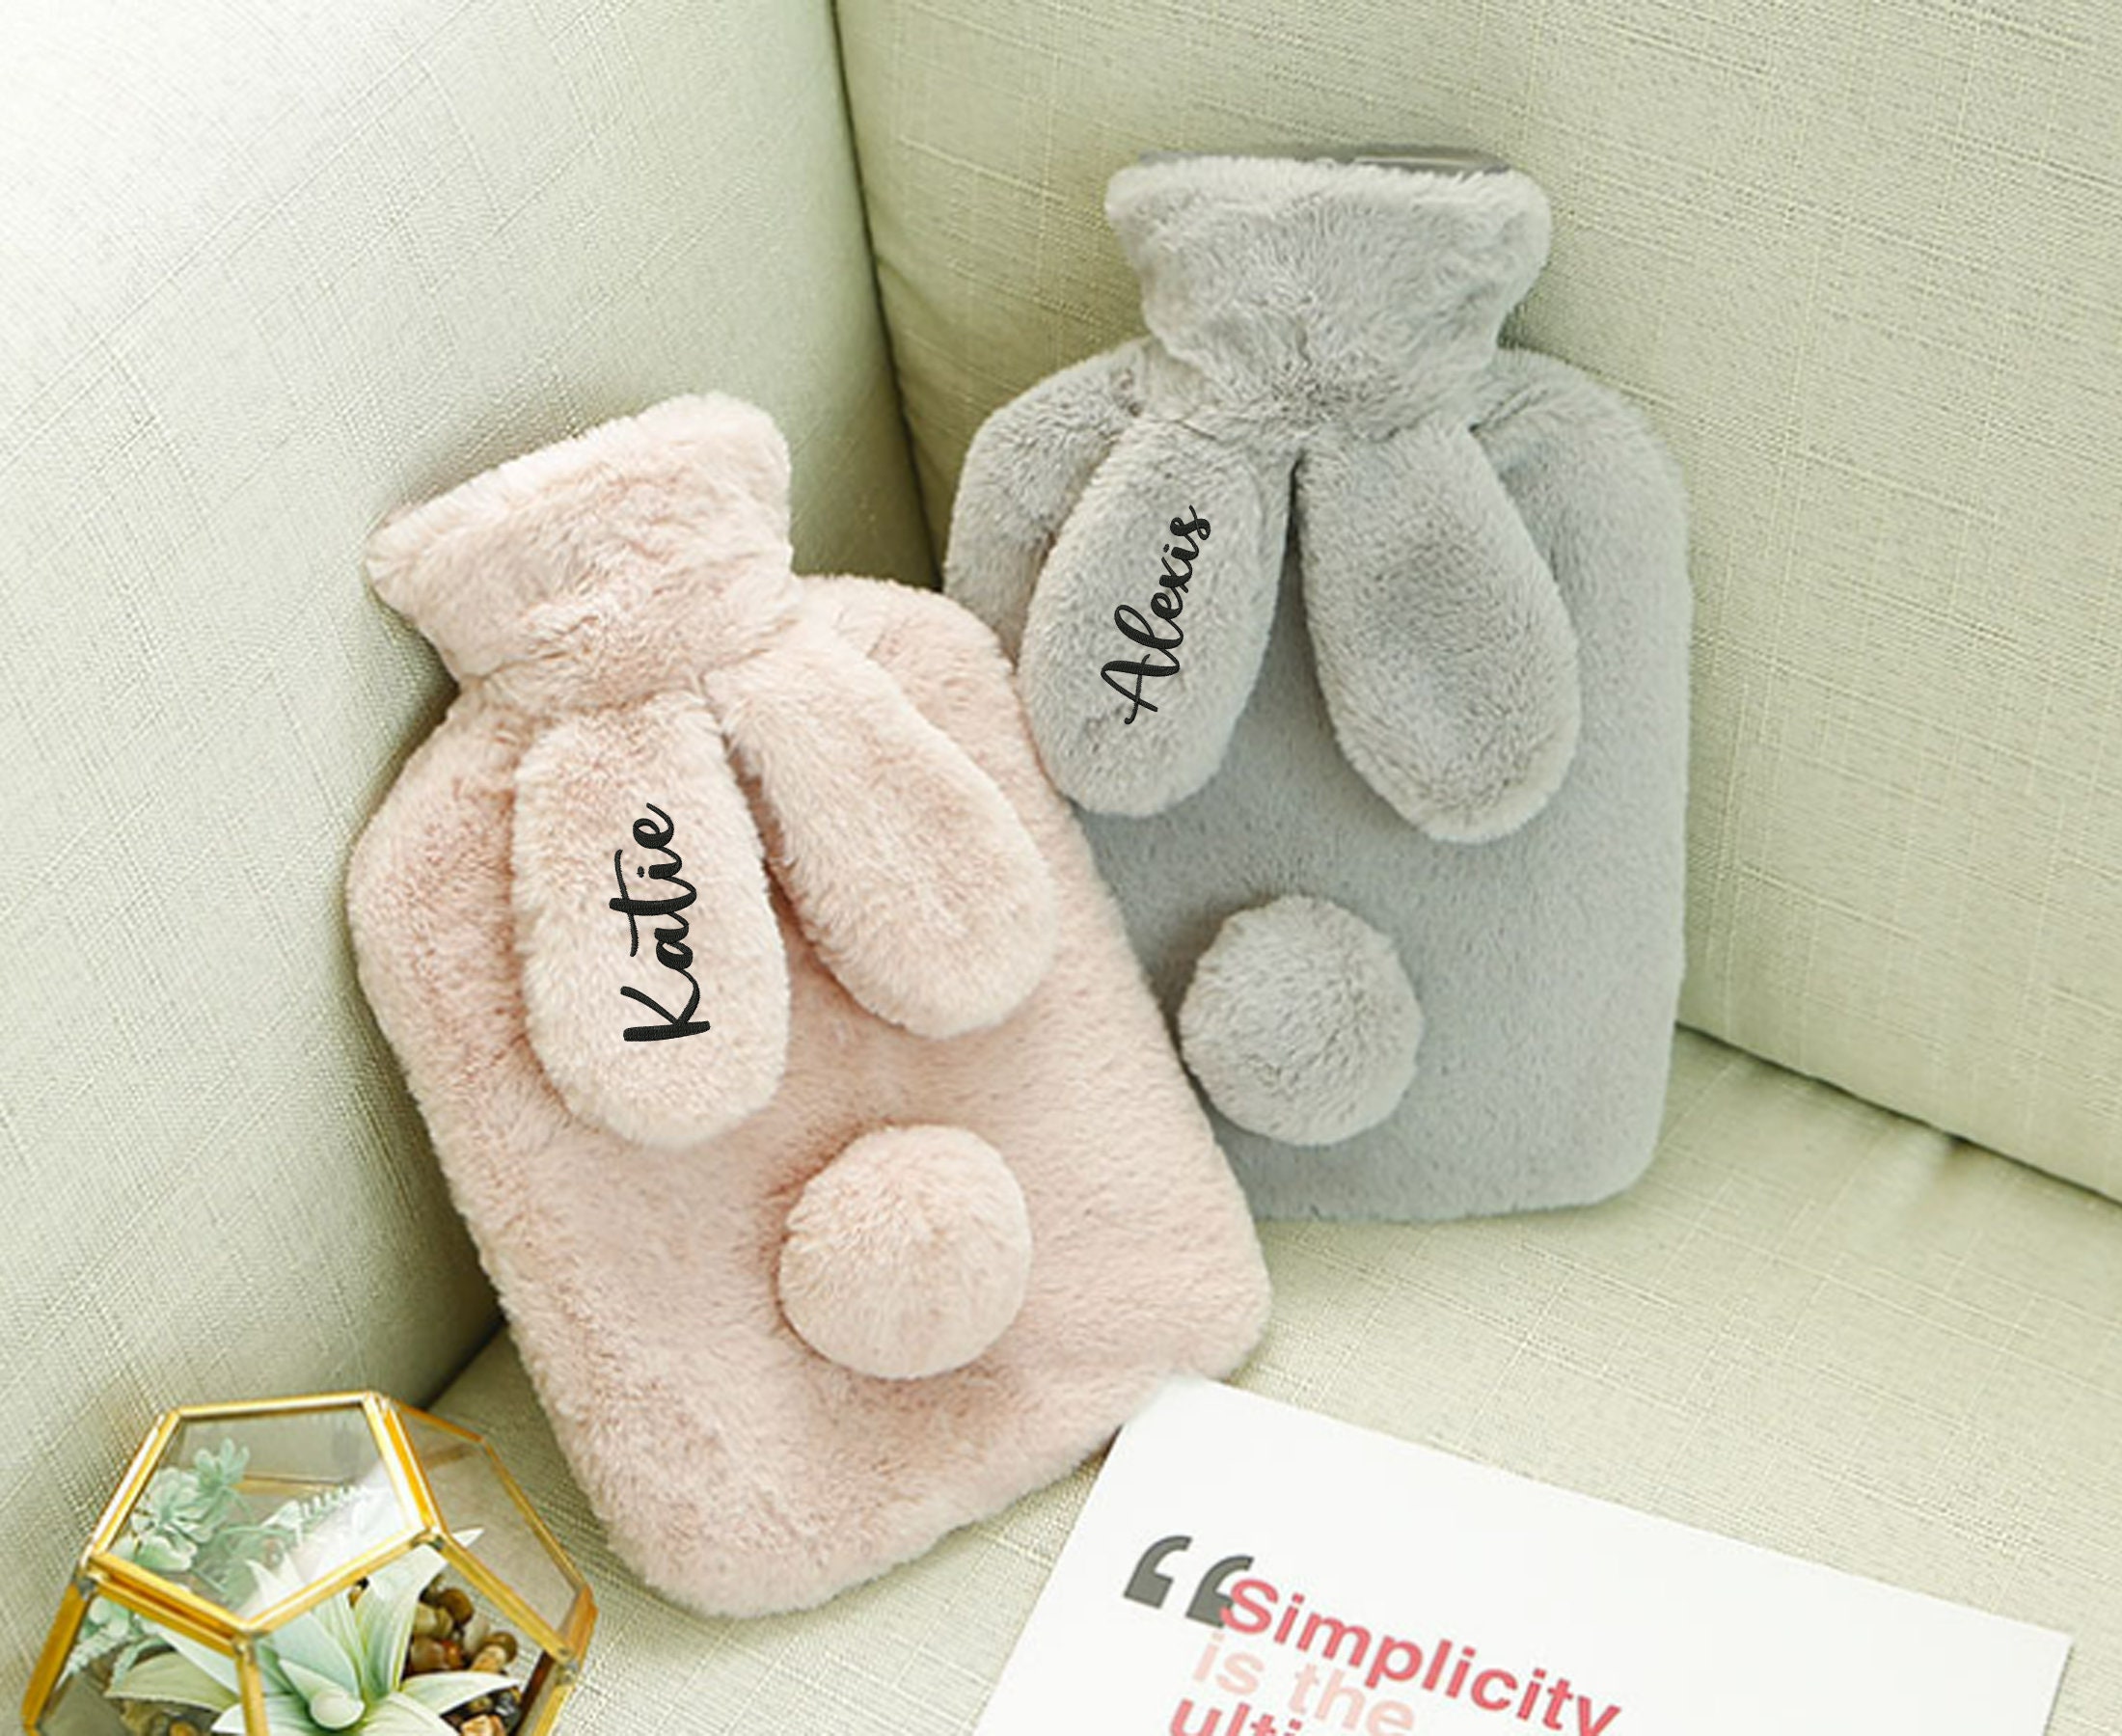 Personalized Hot Water Bottle Bag with Cute Stuffed Bunny Cover,Animal Hot Water Bottle with removable cover,Heat Pack